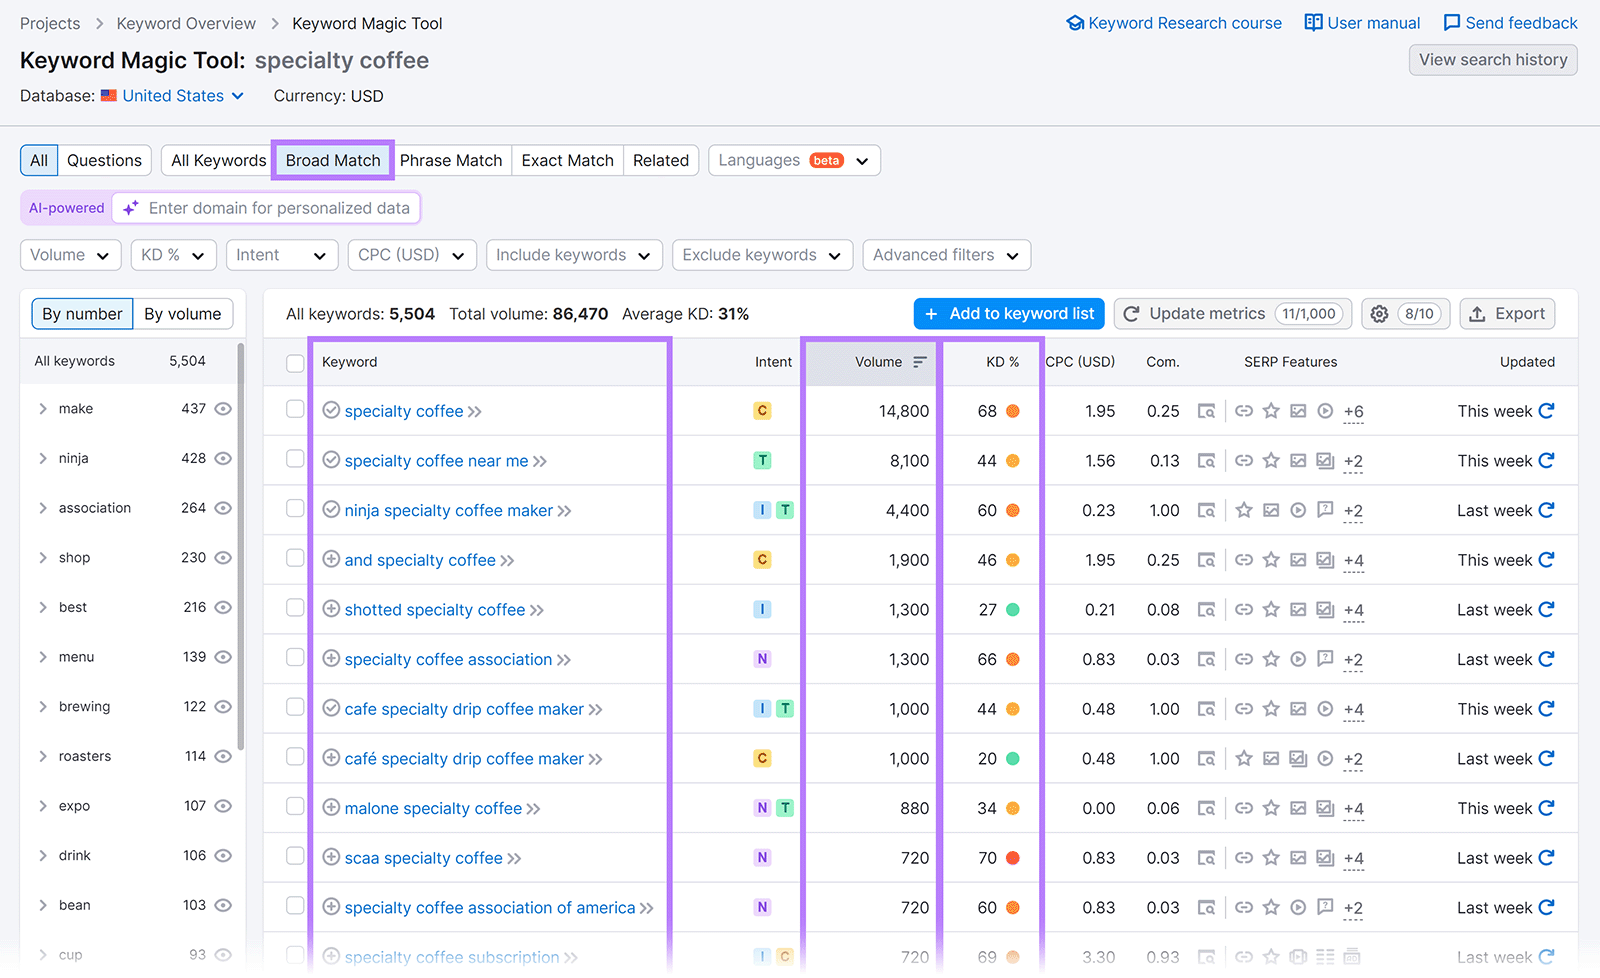 "Broad Match" results table for "specialty coffee" with keyword, volume, and KD columns highlighted